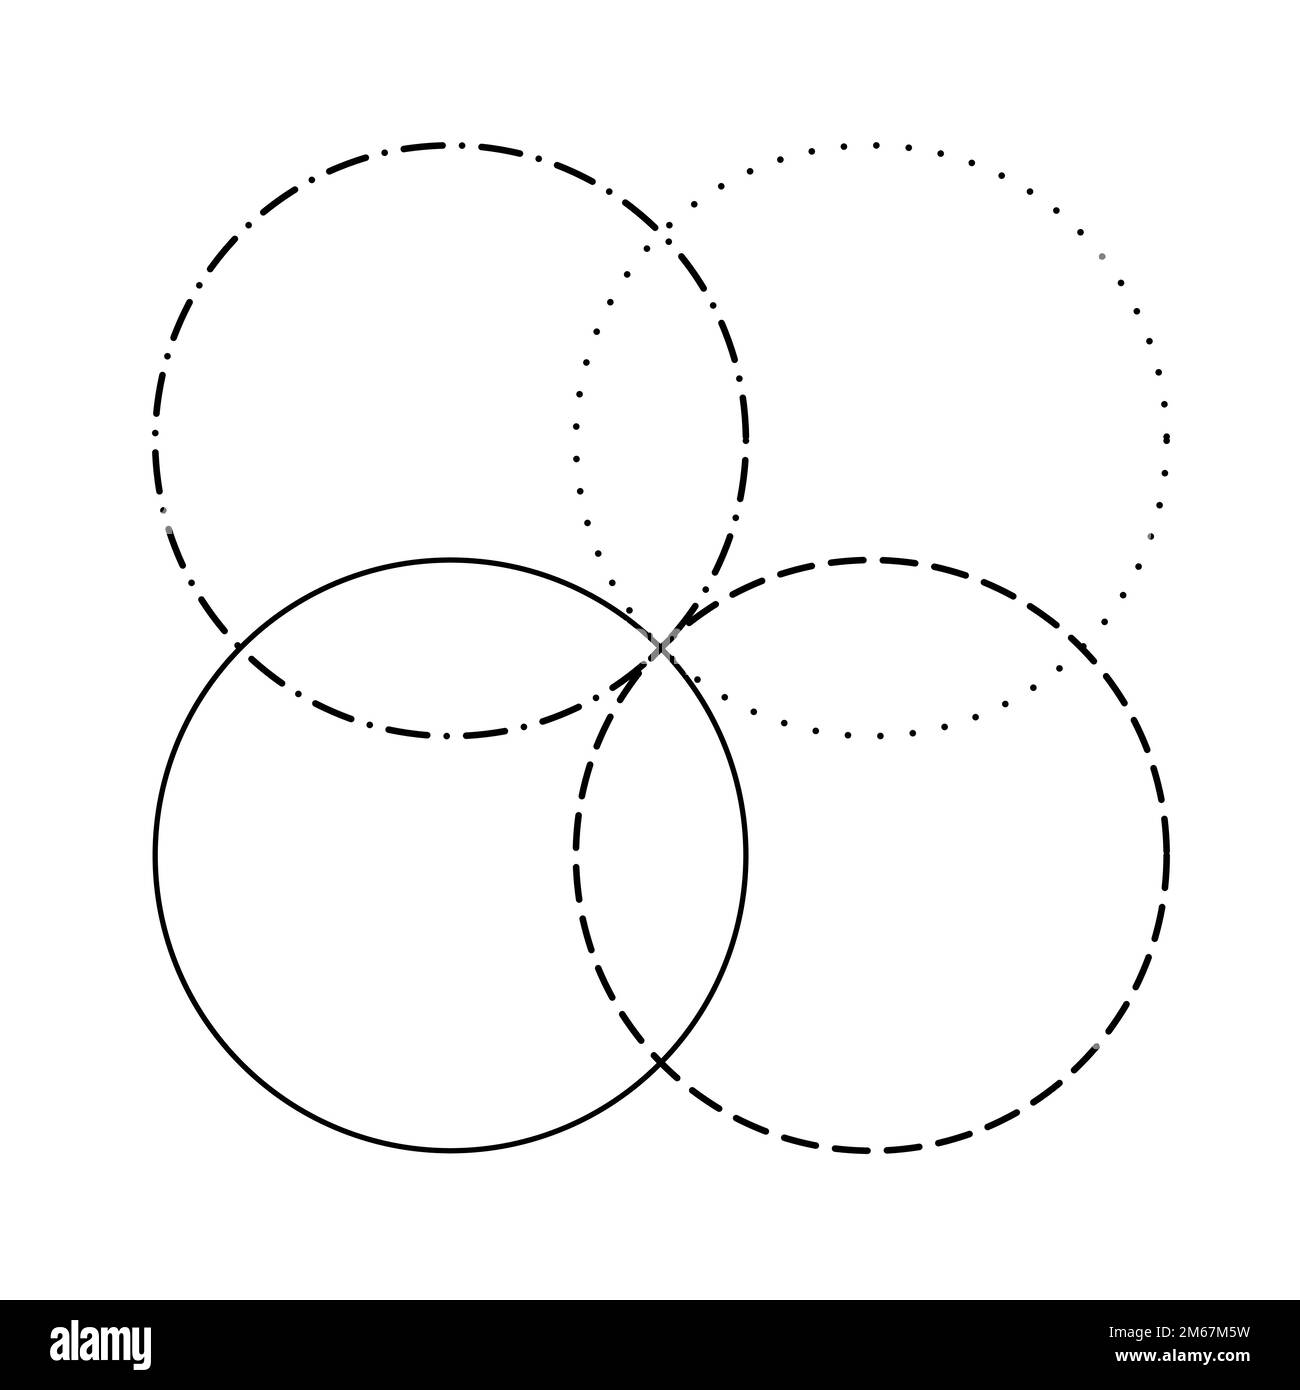 Venn diagram blank merge four dash line and dotted line circles chart infographic sign. Stock Vector